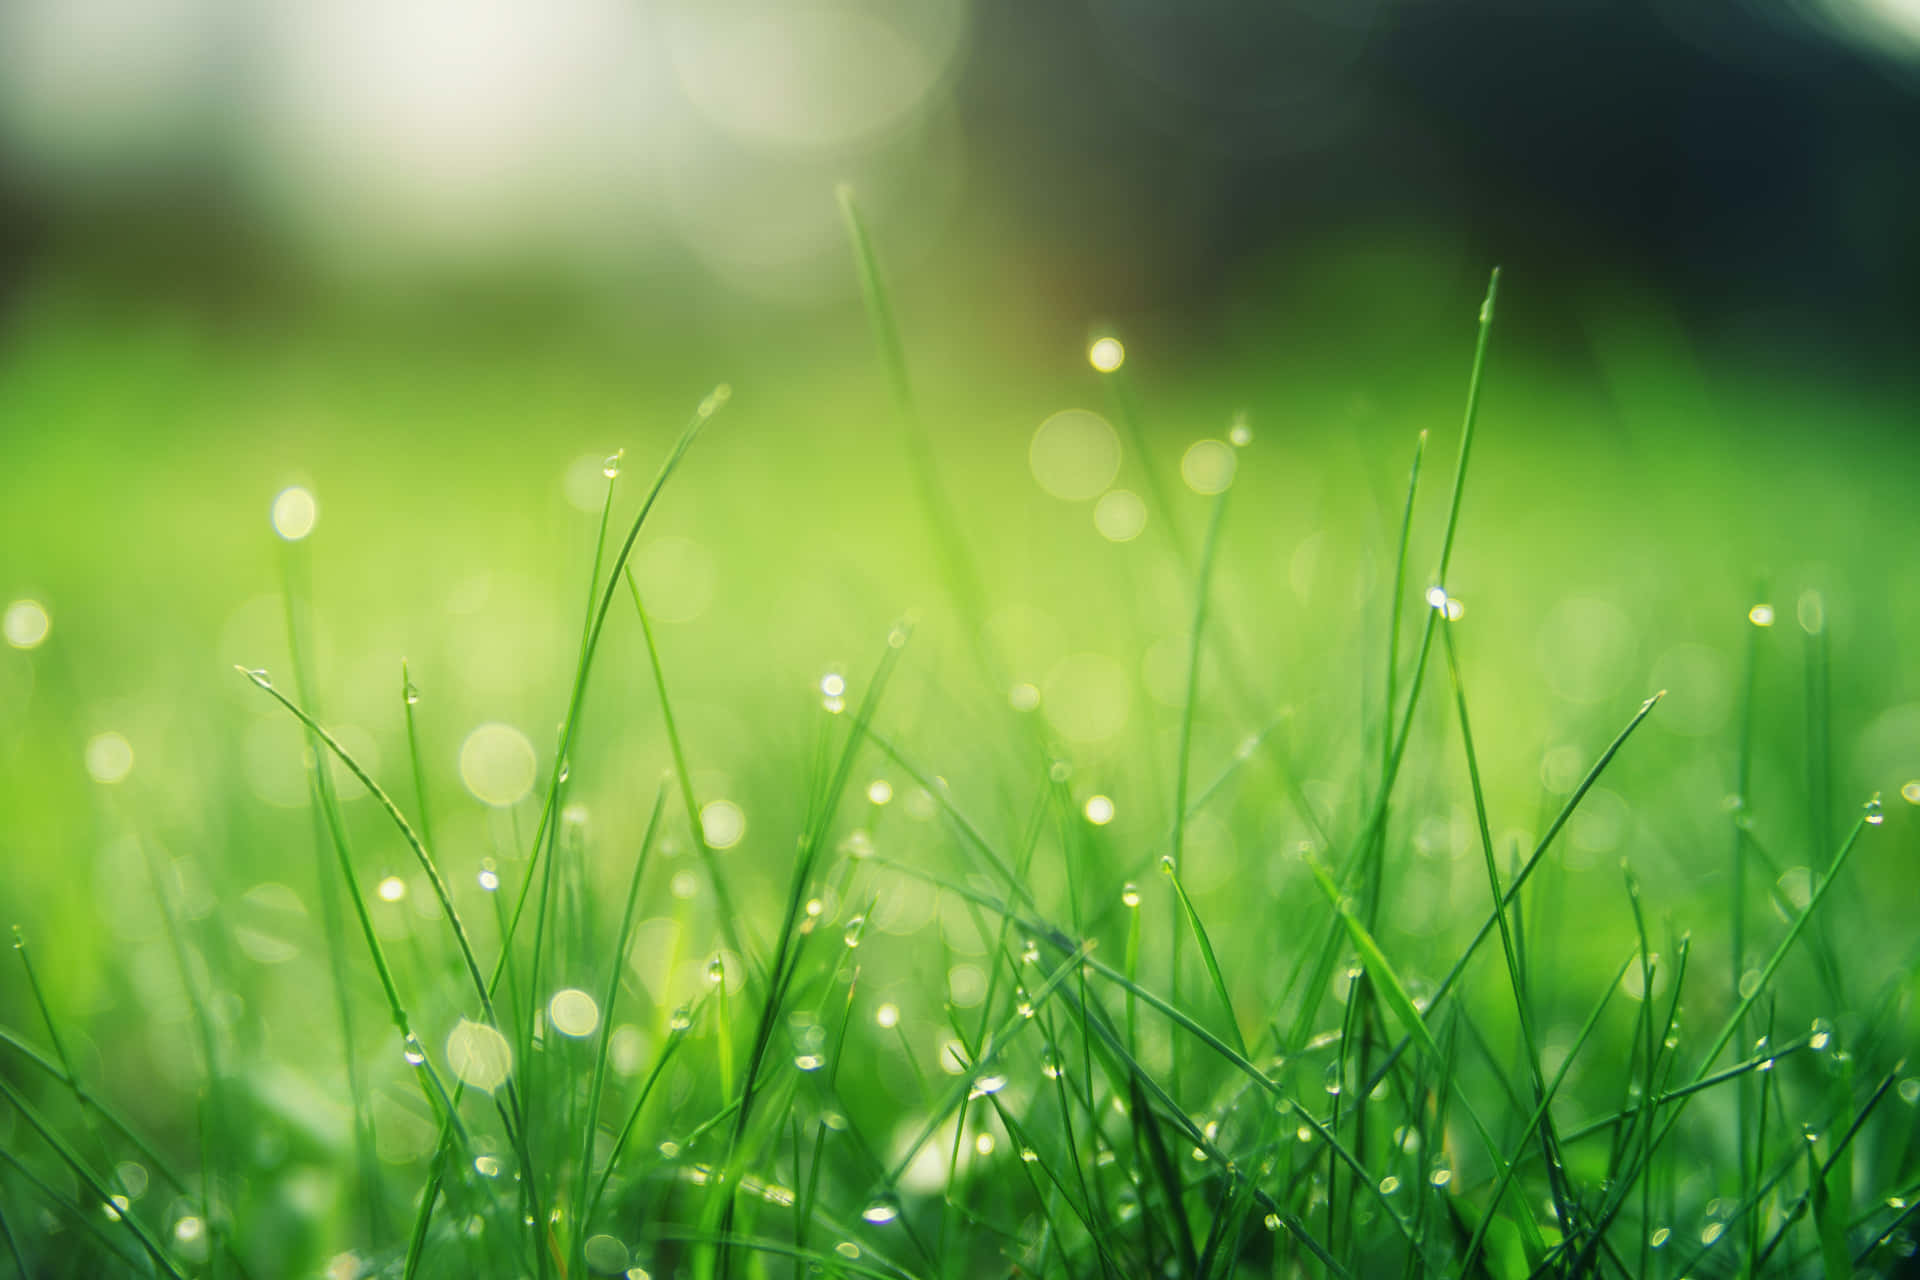 Green Grass With Water Droplets In The Sunlight